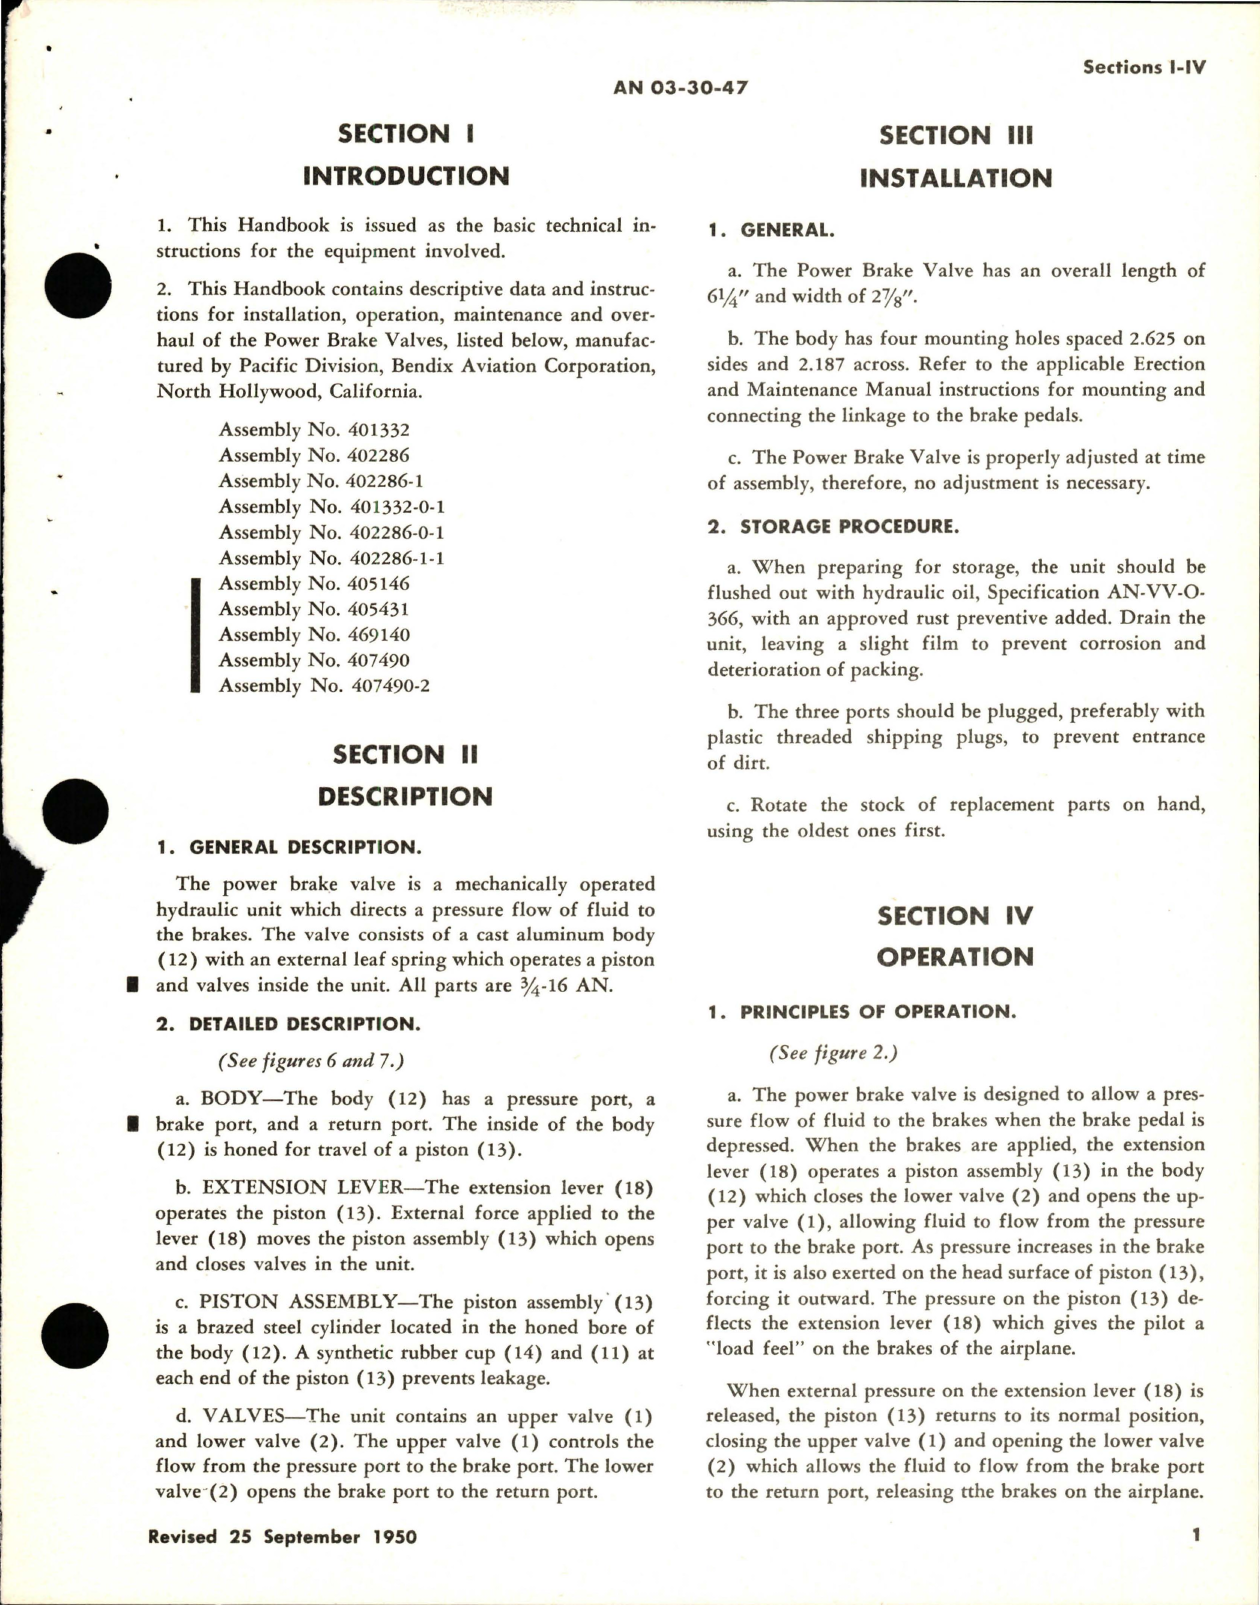 Sample page 5 from AirCorps Library document: Operation, Service, and Overhaul Instructions with Parts Catalog for Power Brake Valves